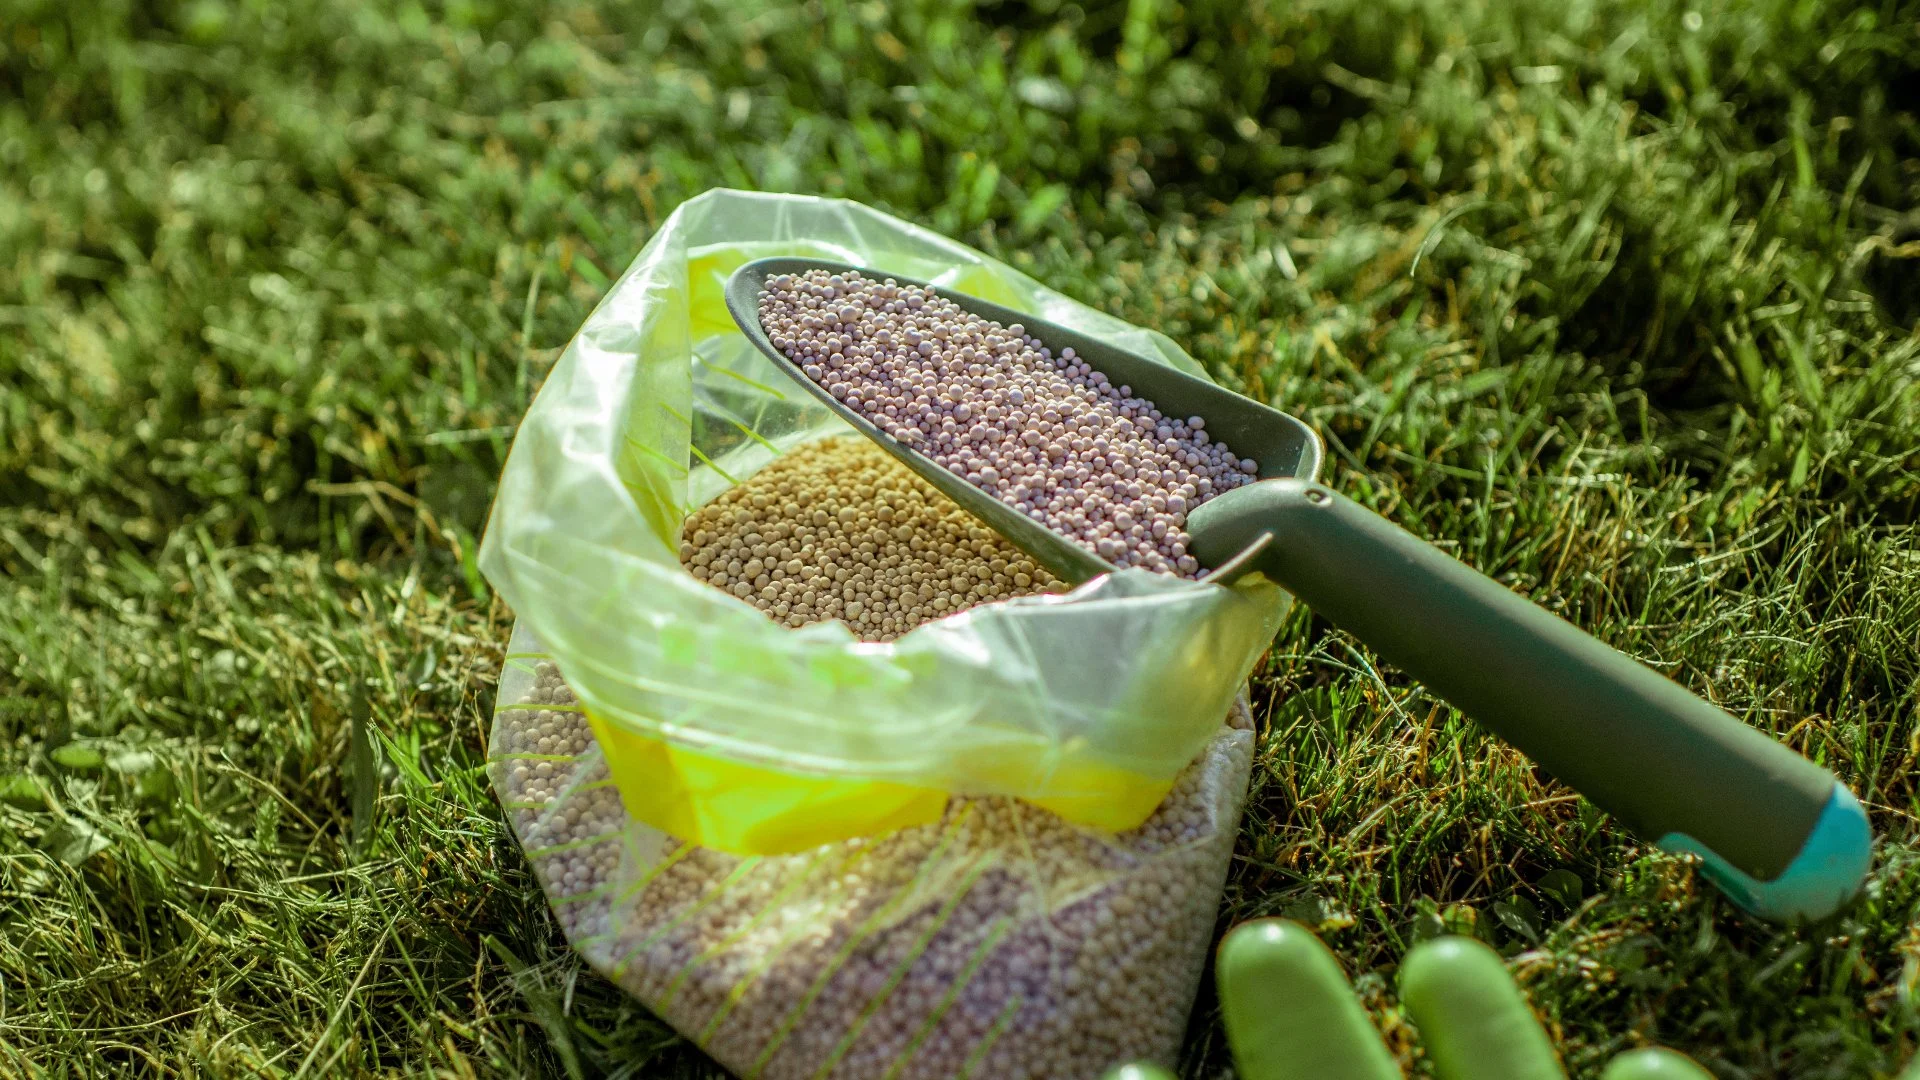 How Do You Know if Your Lawn Is in Need of a Sulfur Treatment?